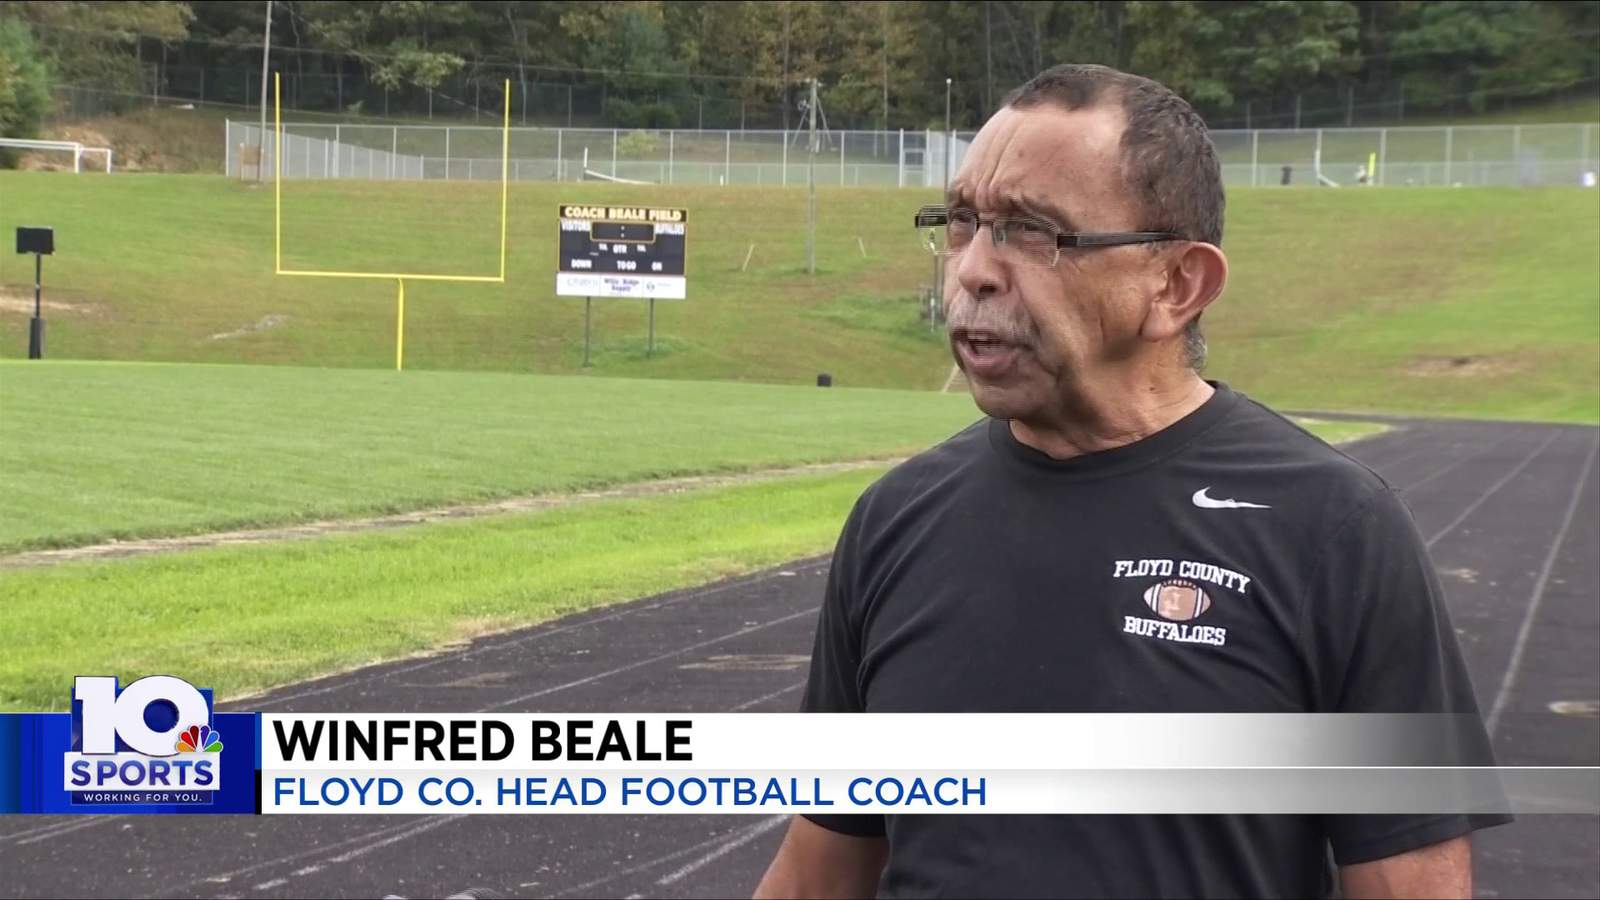 Floyd County head football coach honored with a field in his name